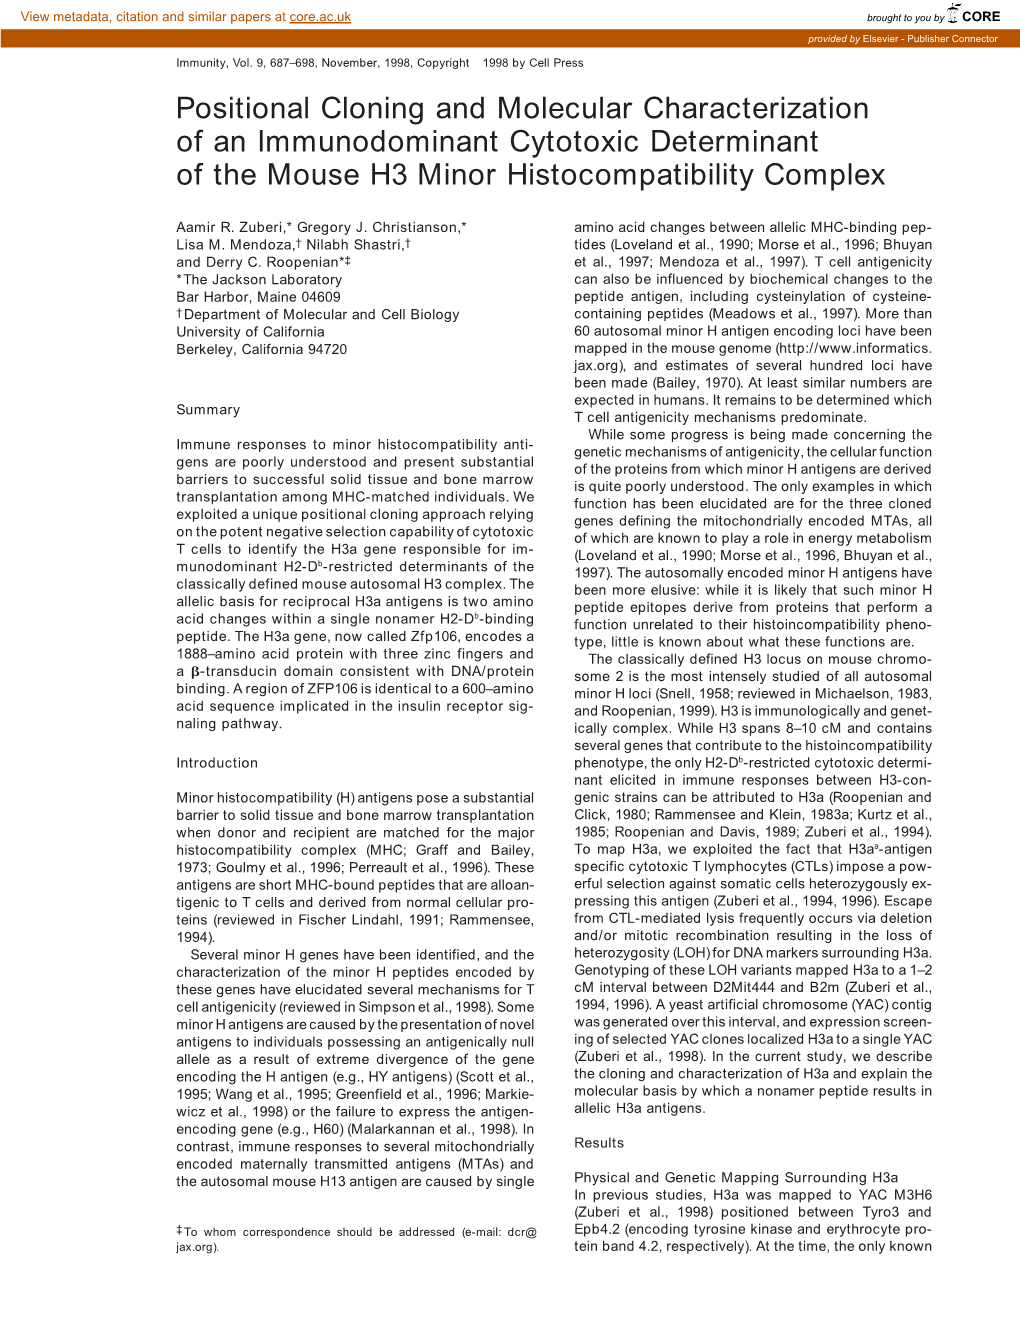 Positional Cloning and Molecular Characterization of an Immunodominant Cytotoxic Determinant of the Mouse H3 Minor Histocompatibility Complex